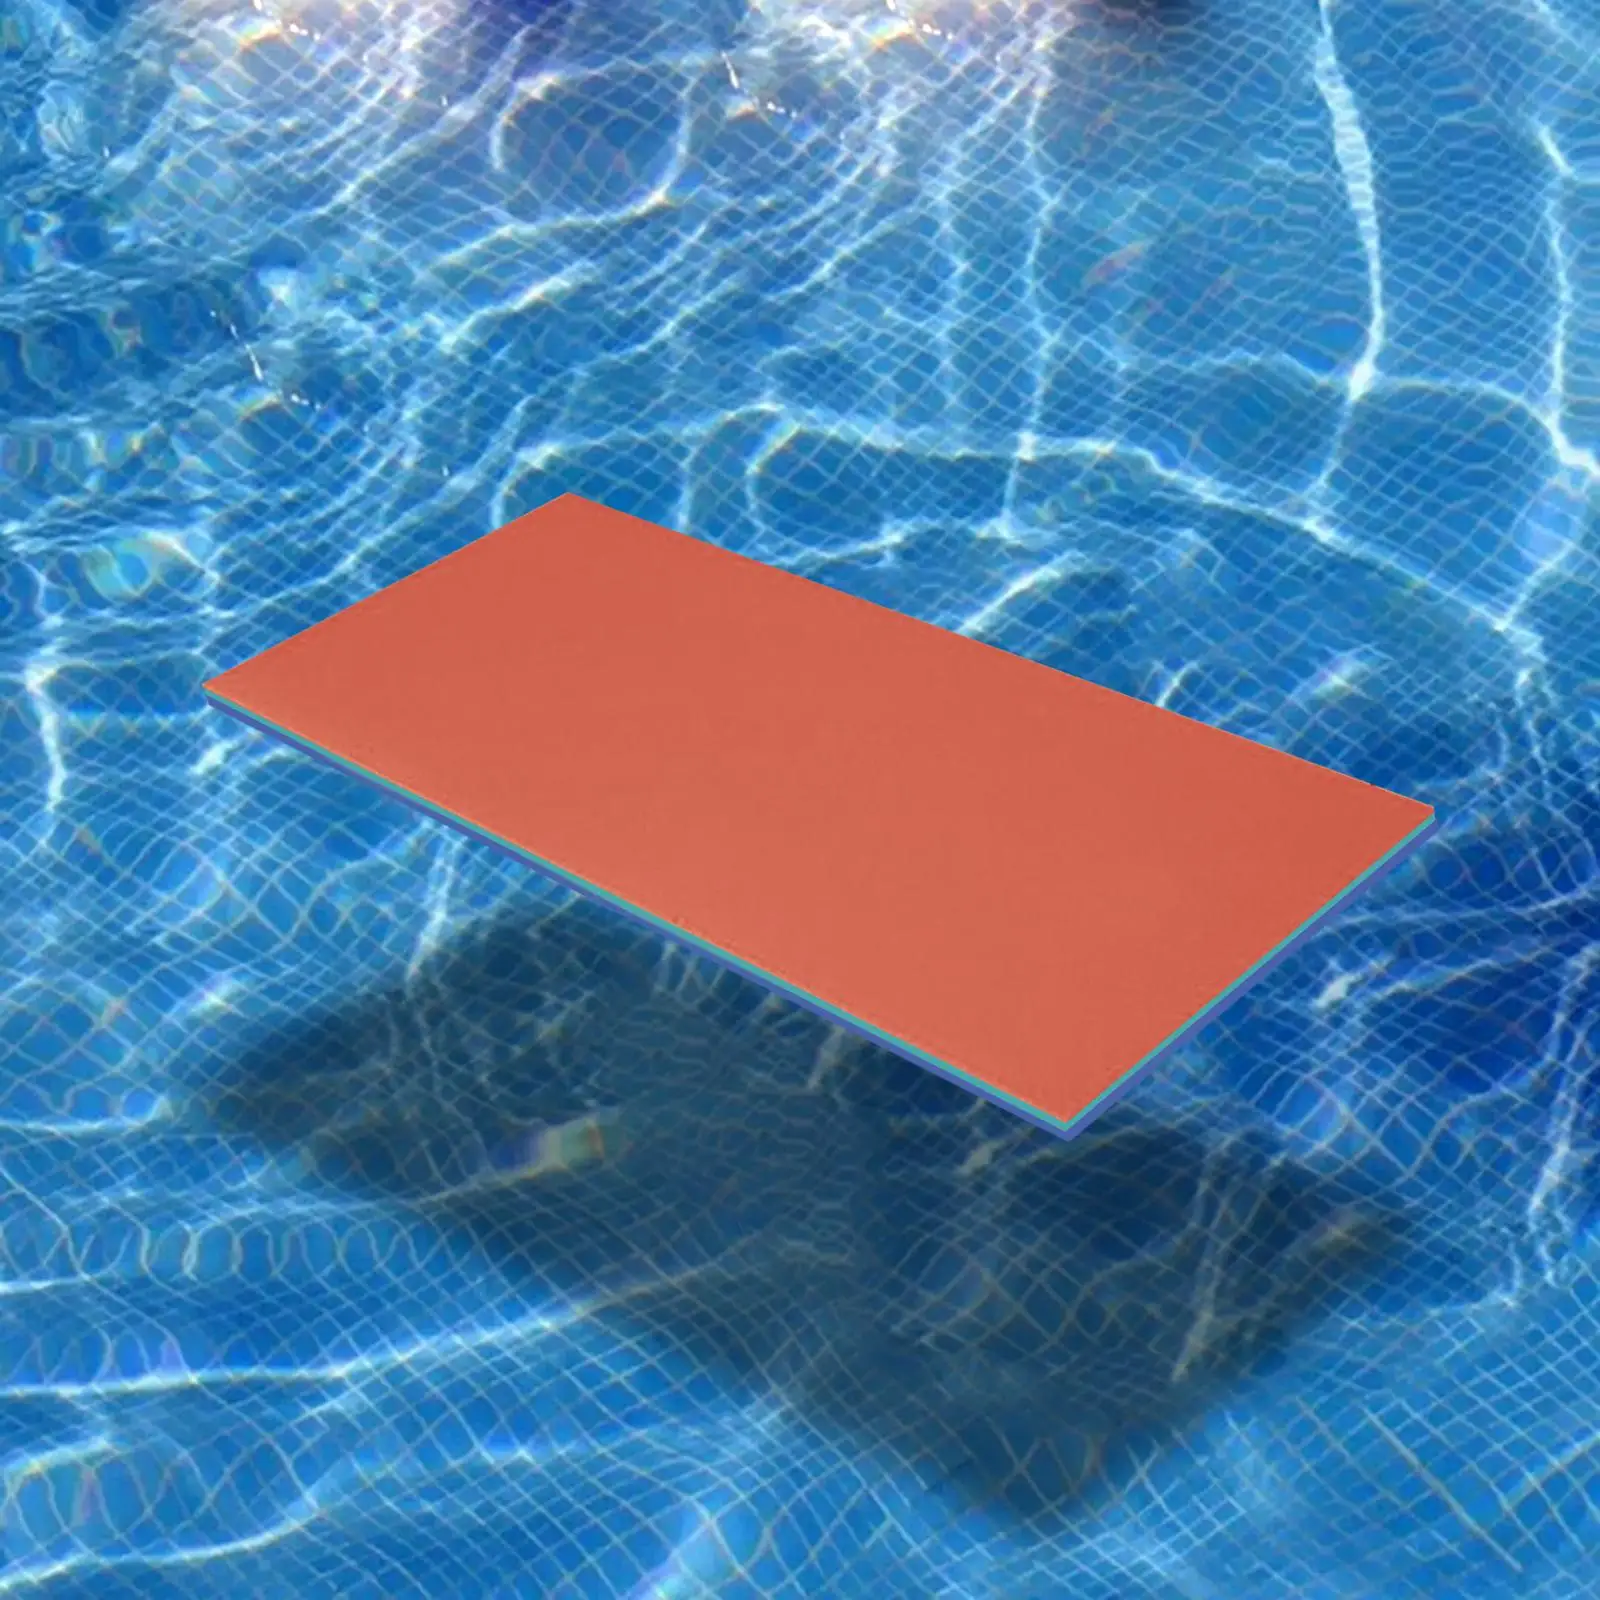 Floats Mattress Relaxing Blanket Floating Water Pad for Pool Beach Summer